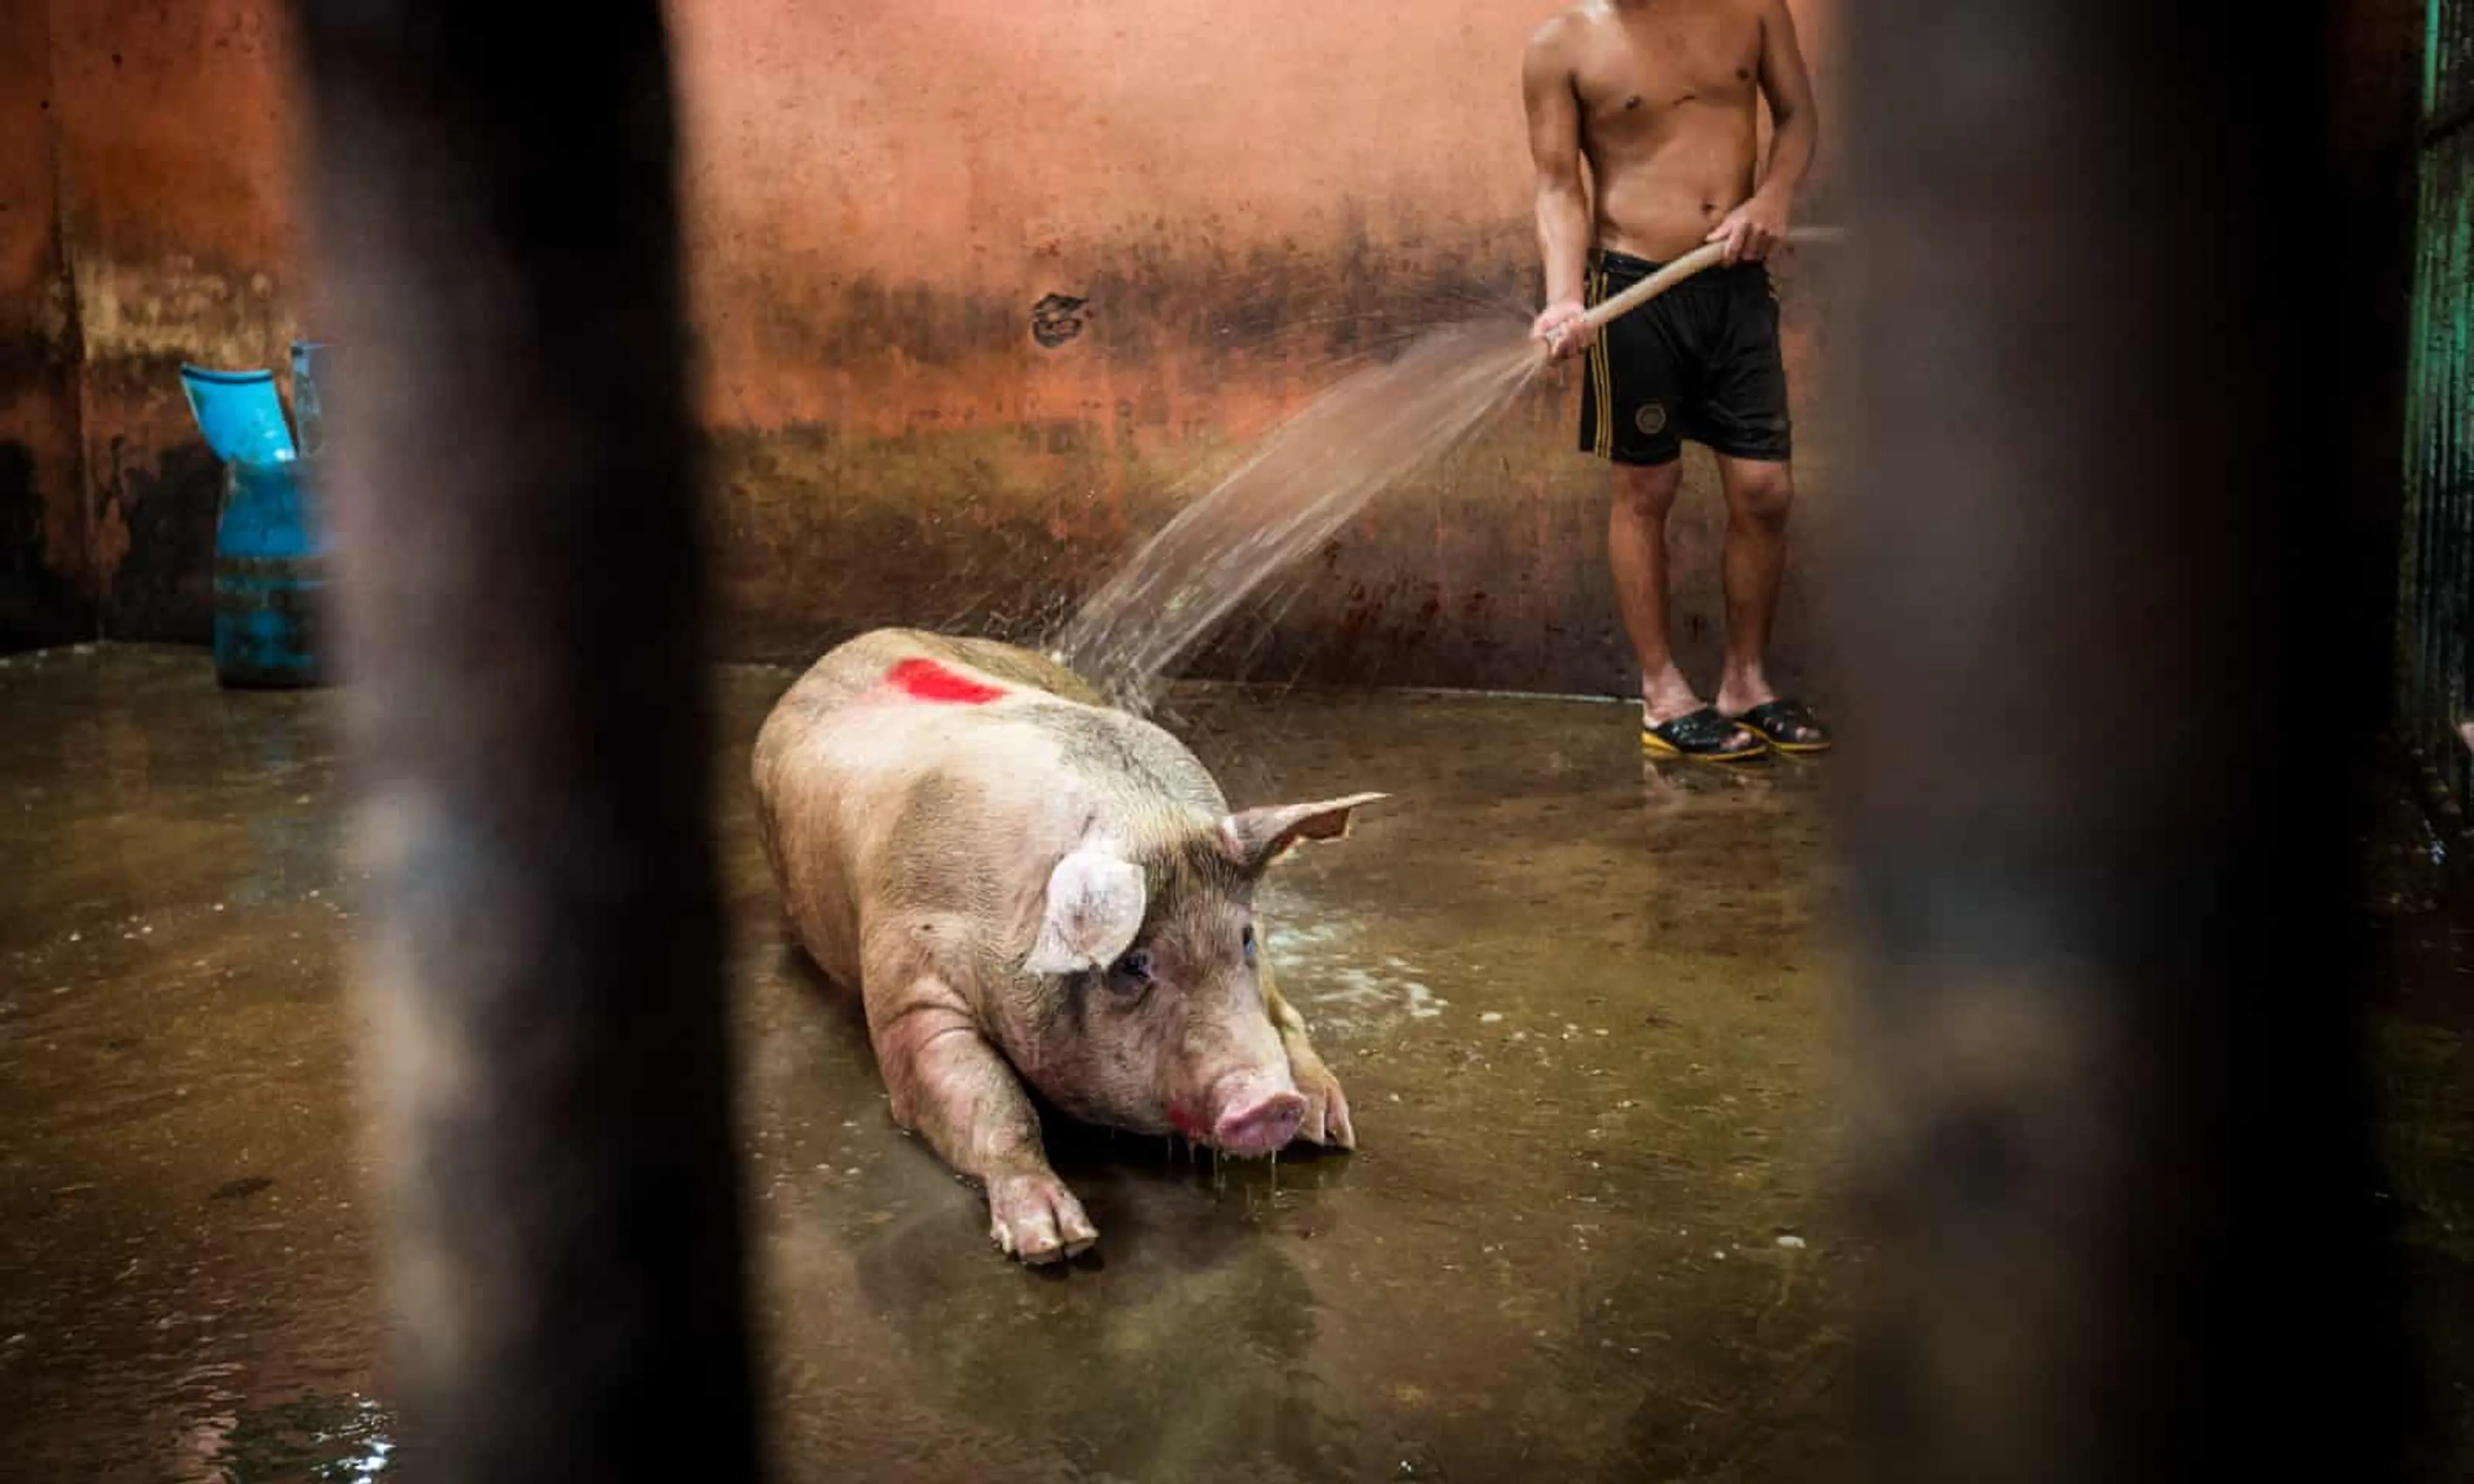 Death by clubbing: the brutality of Thailand's pig slaughterhouses